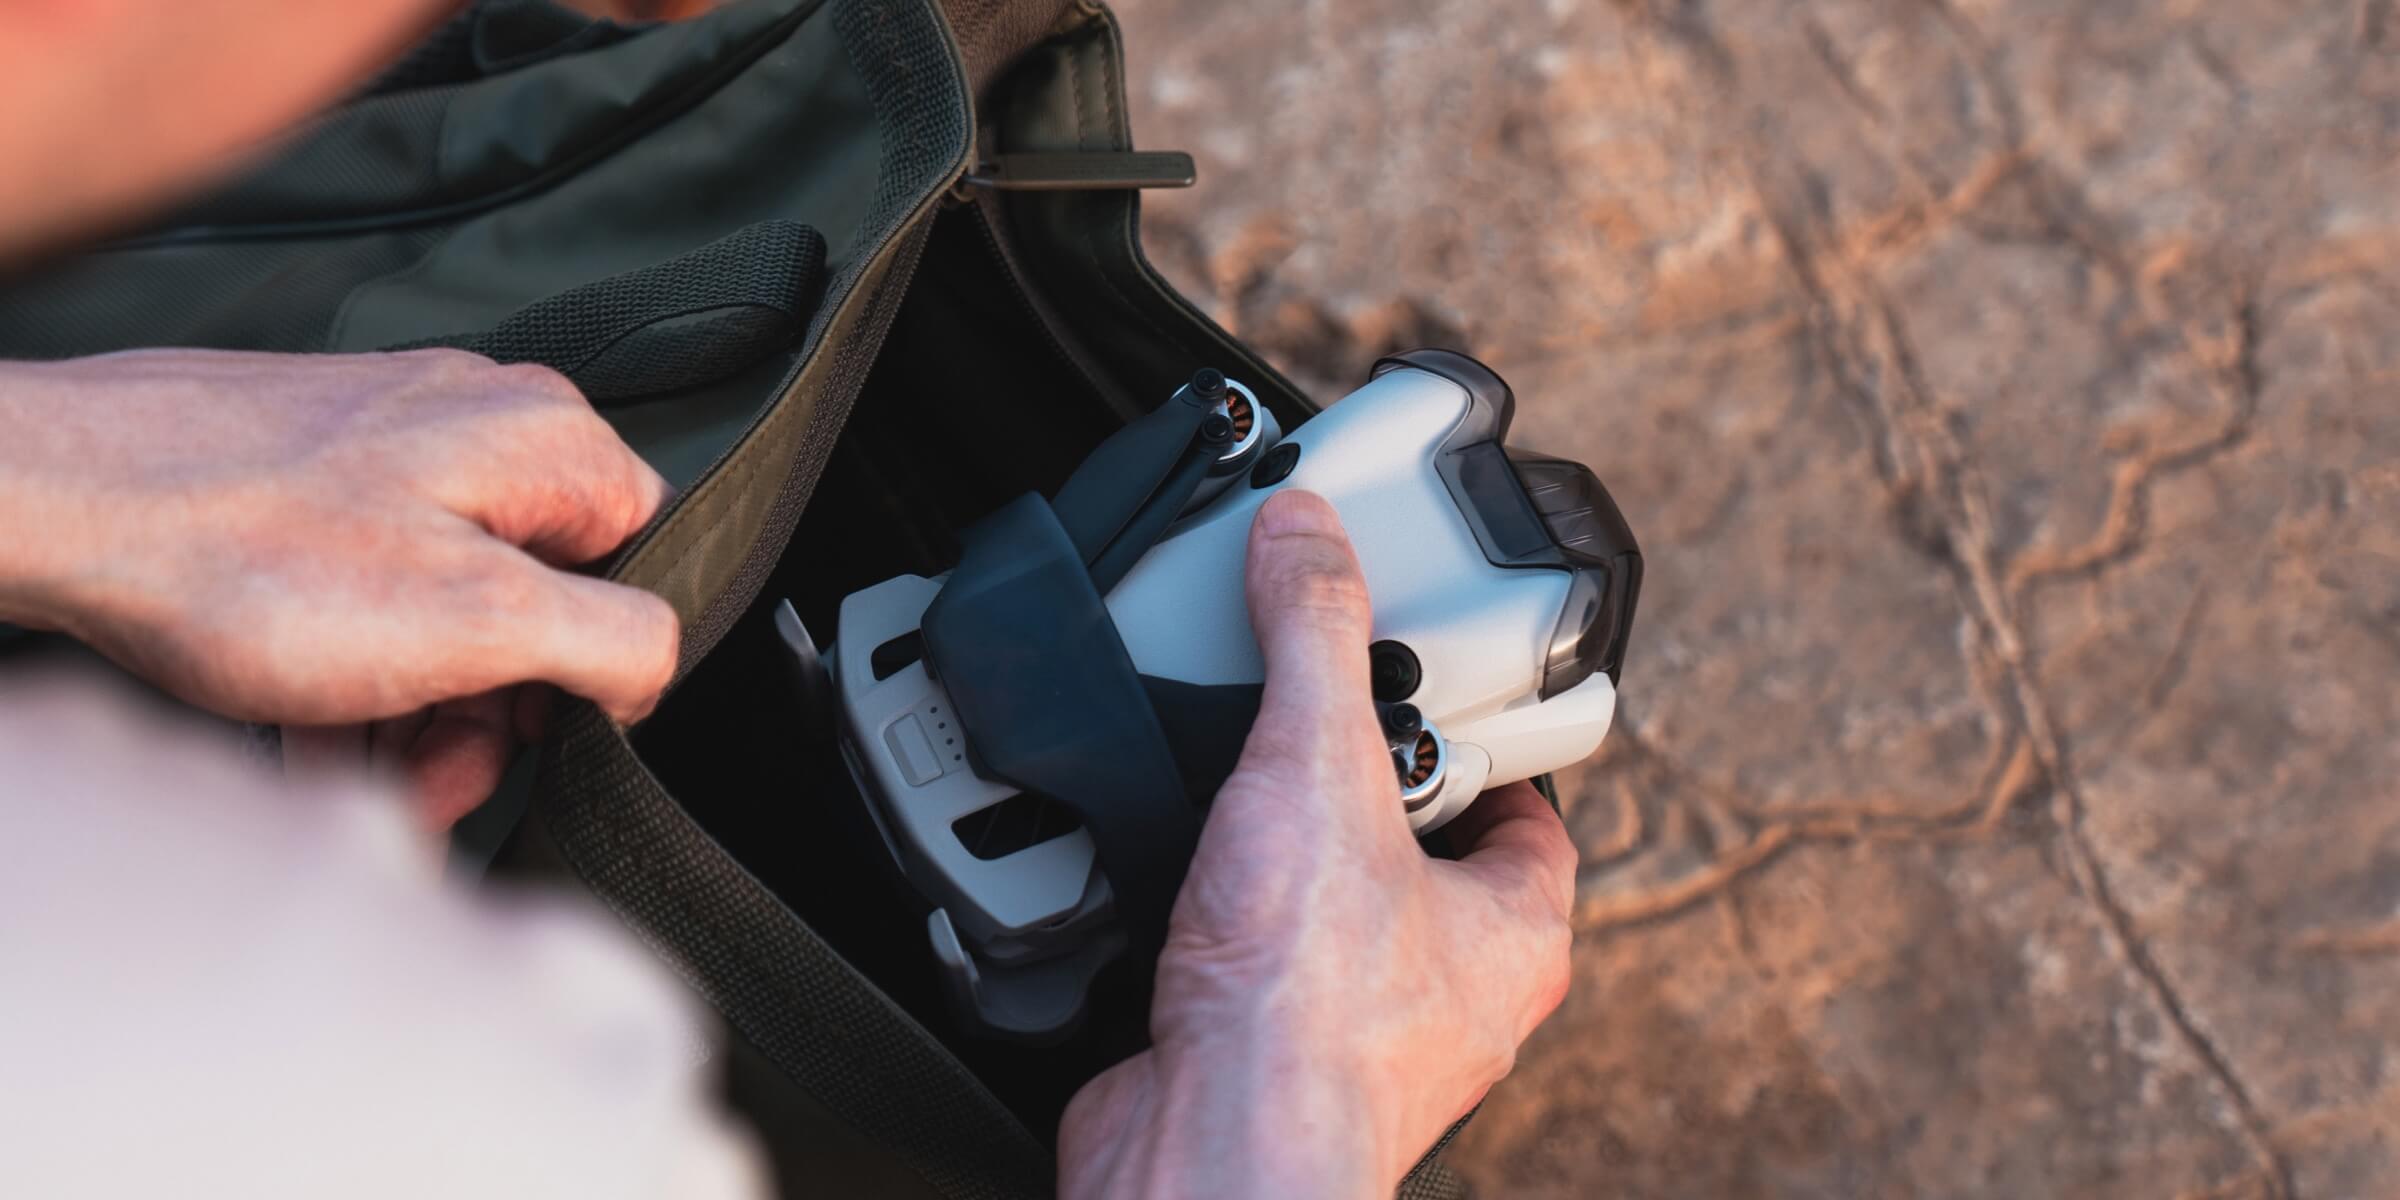 The Mini 4 Pro can easily fit in your bag